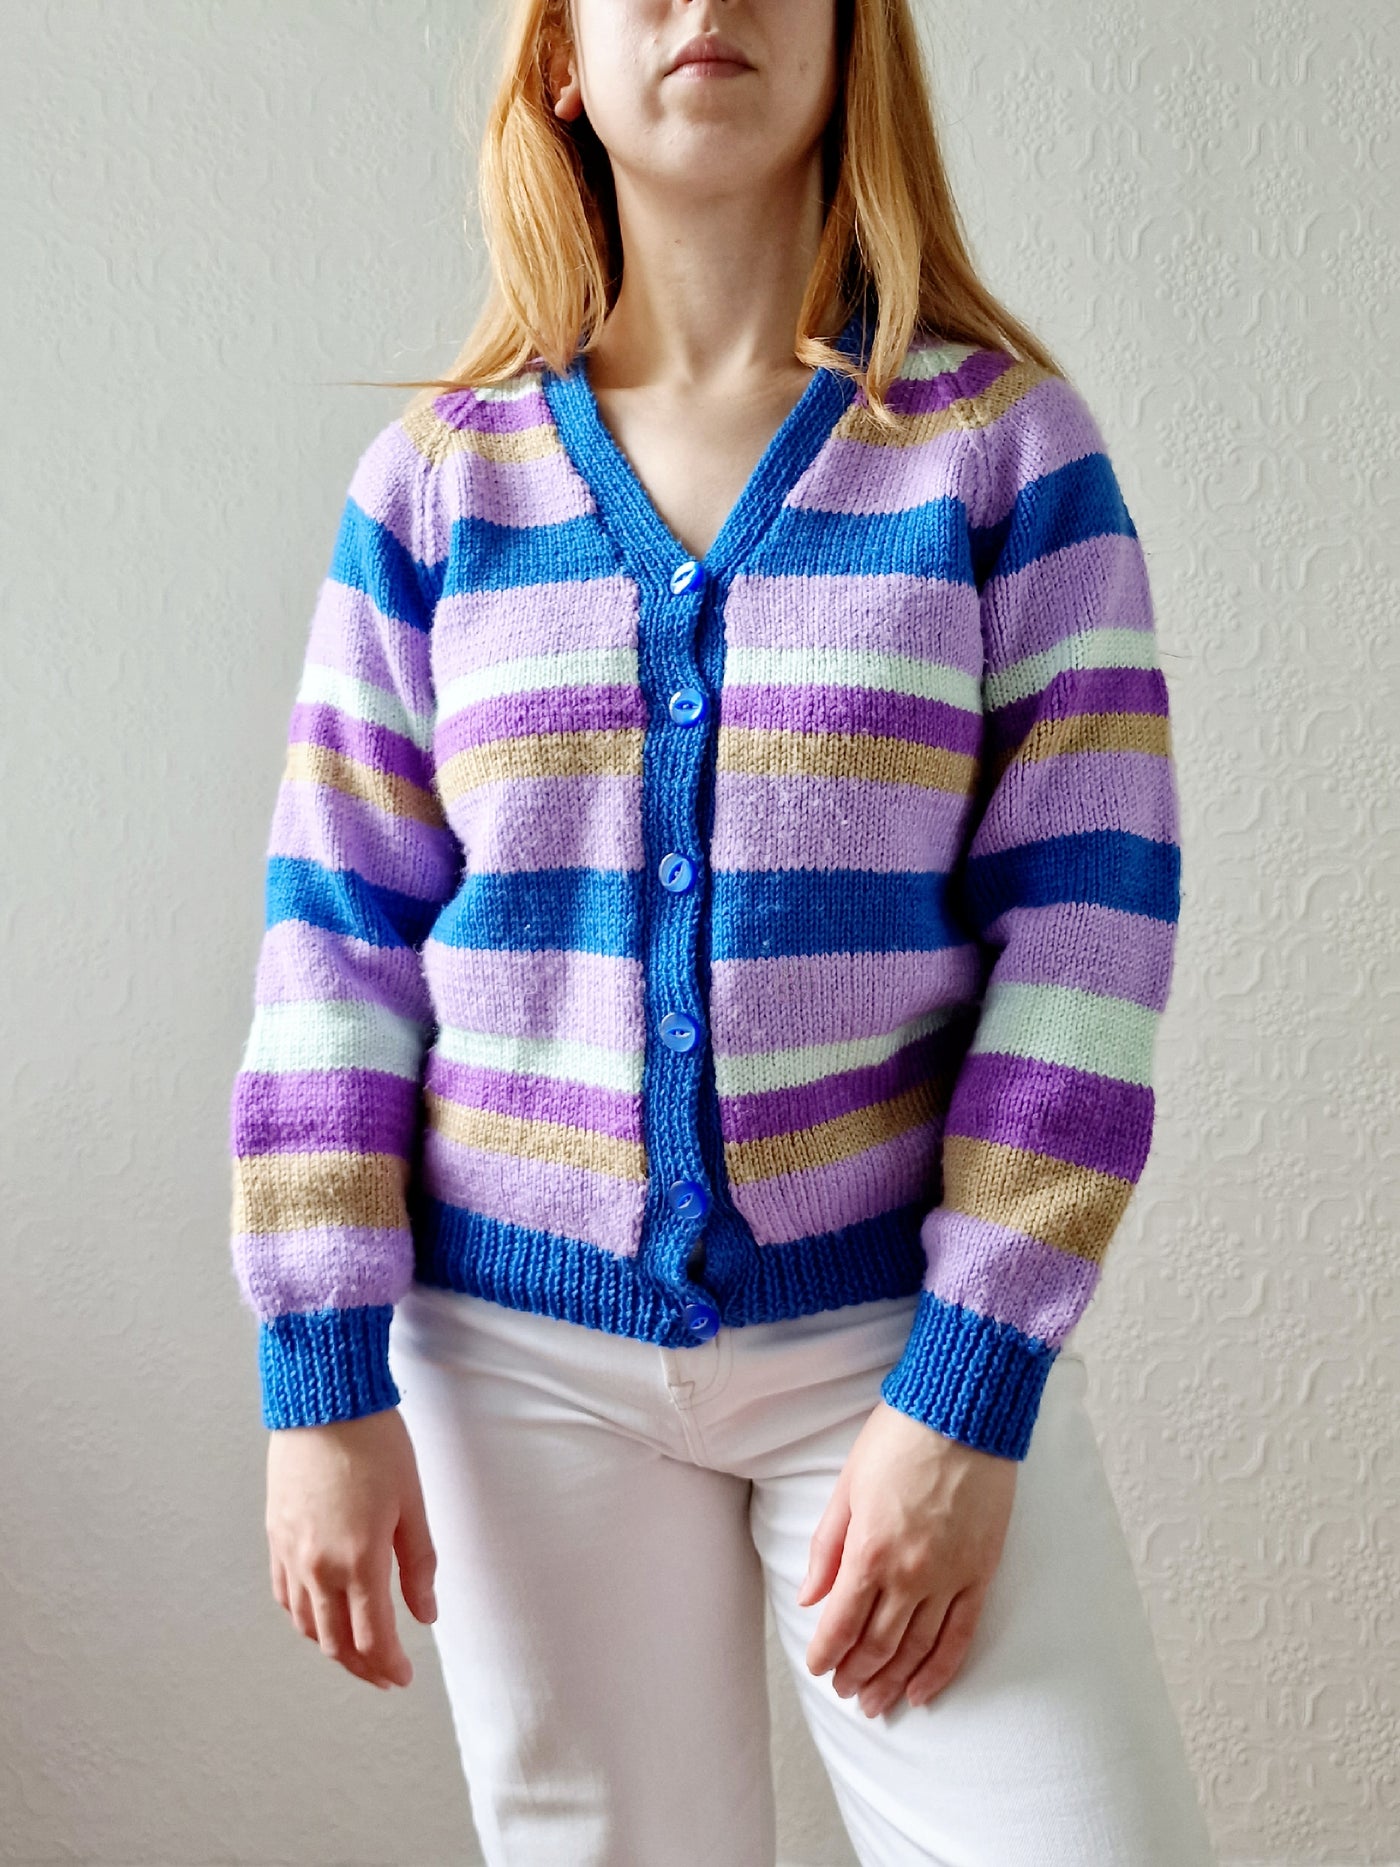 Vintage 80s Handknitted Multicolour Striped V-Neck Cardigan - S/M